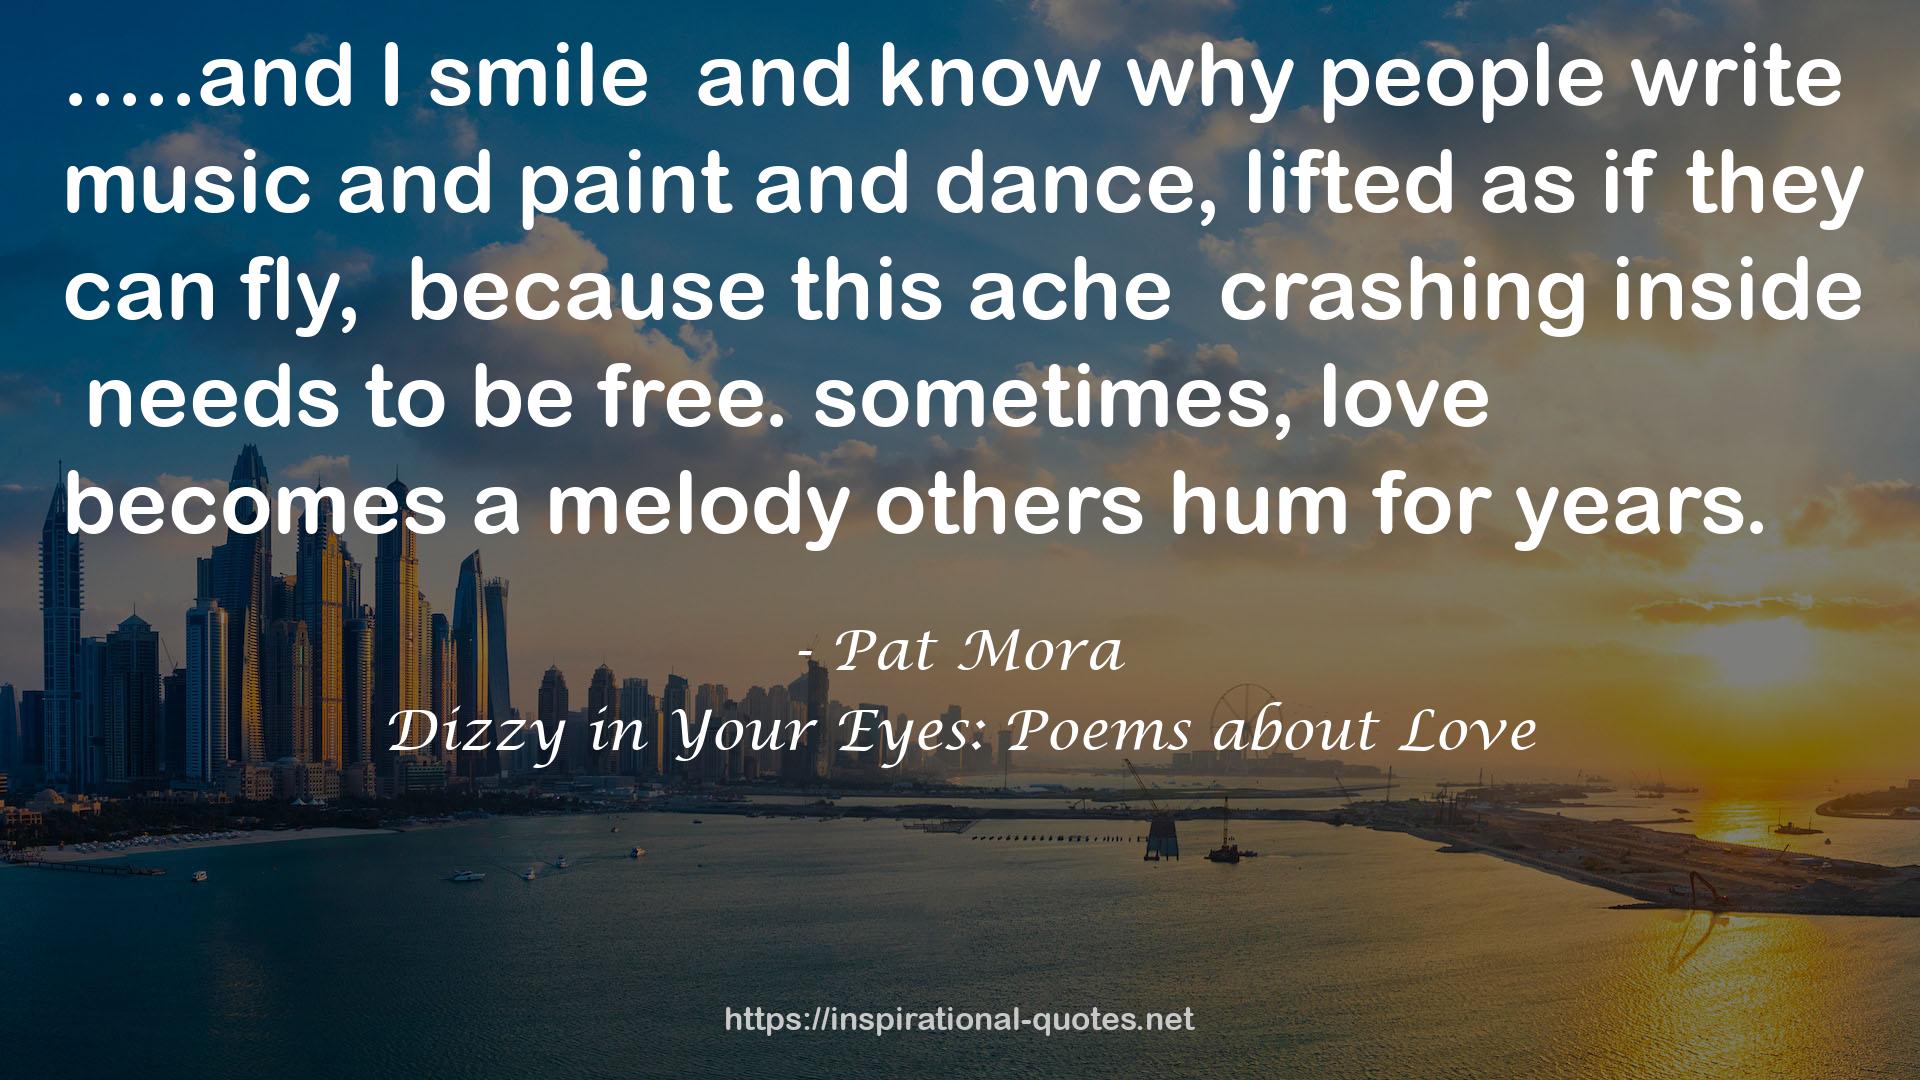 Dizzy in Your Eyes: Poems about Love QUOTES